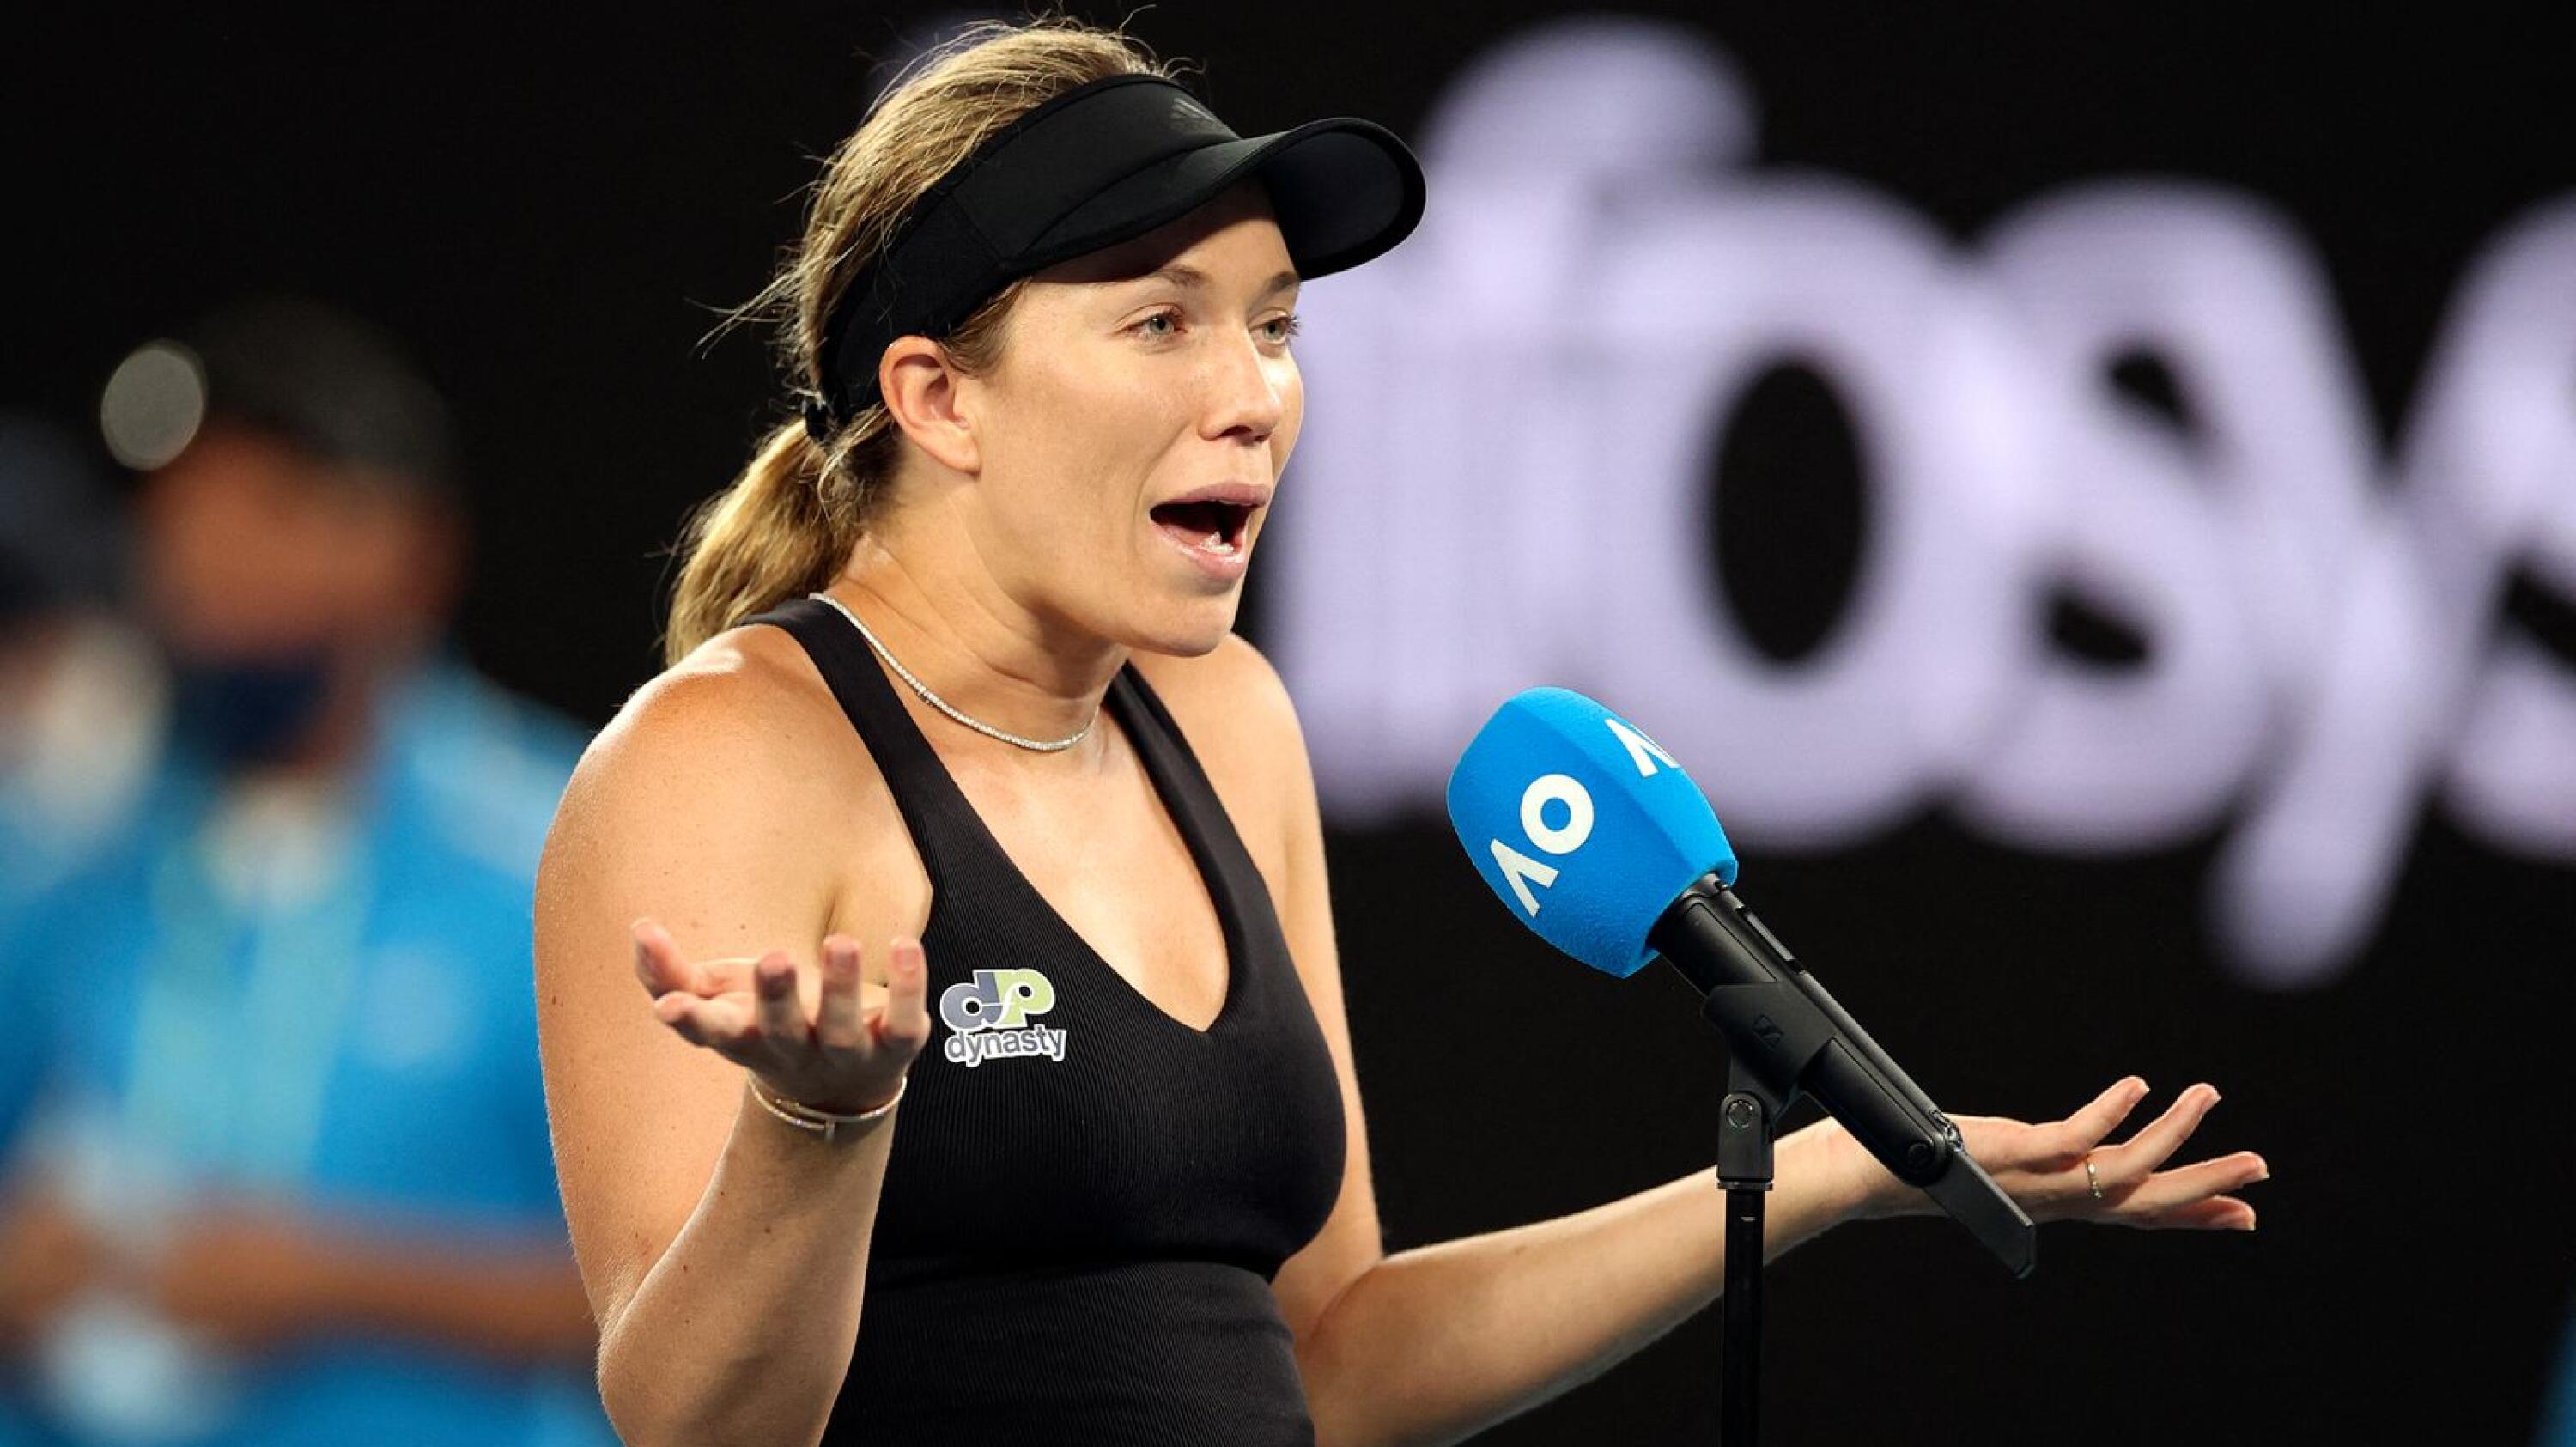 Danielle Collins of the US speaks after winning her women's singles semi-final match against Poland's Iga Swiatek on day eleven of the Australian Open tennis tournament in Melbourne on Thursday